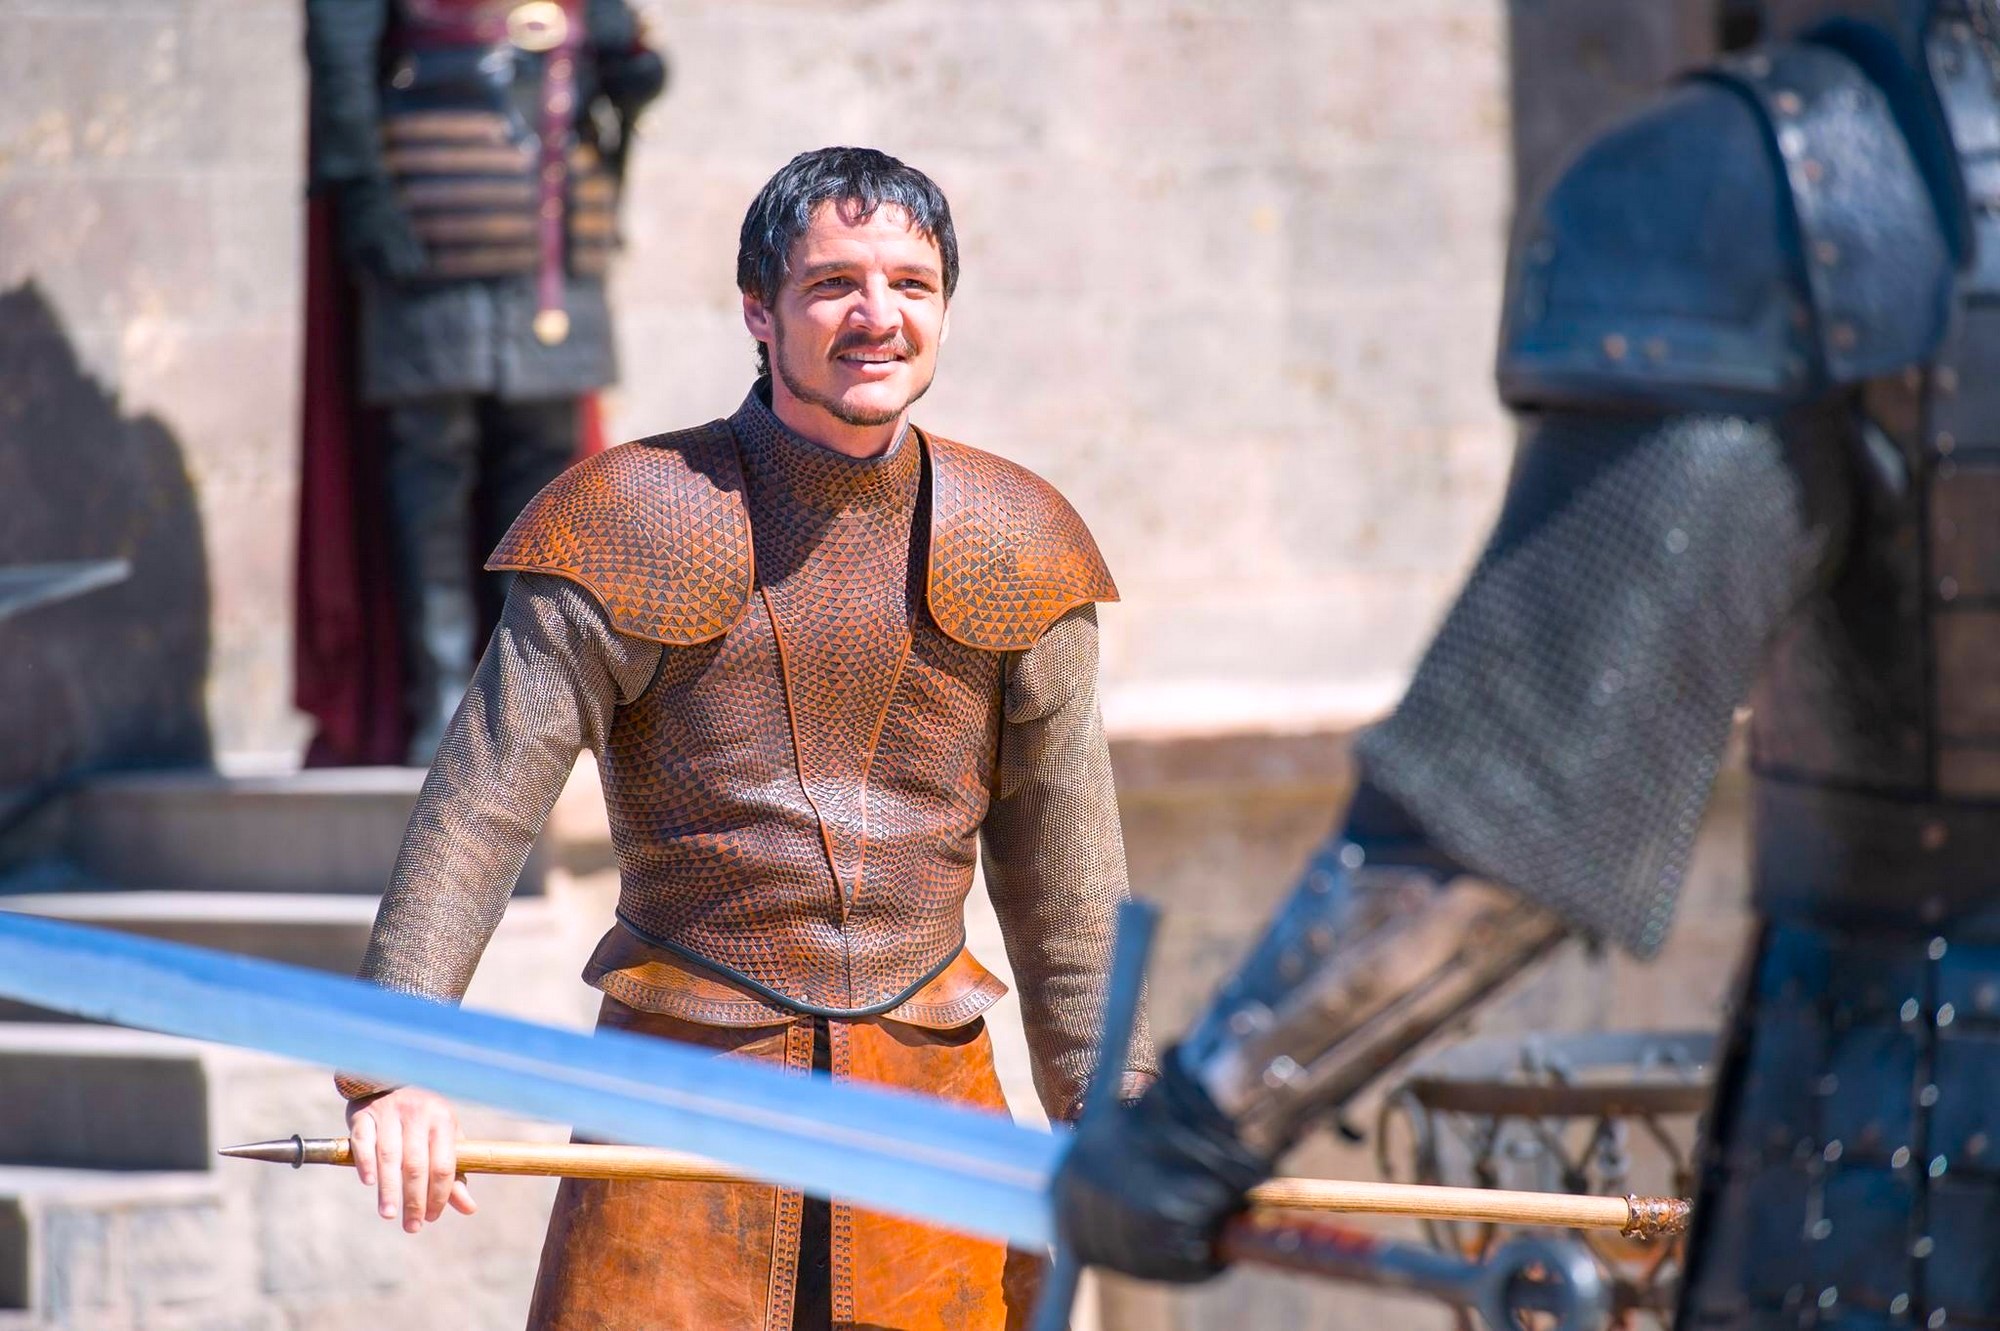 Pedro Pascal &Amp; Joseph Quinn'S Roles In Gladiator 2 Are Revealed With A Bloody Arena Battle Sequence